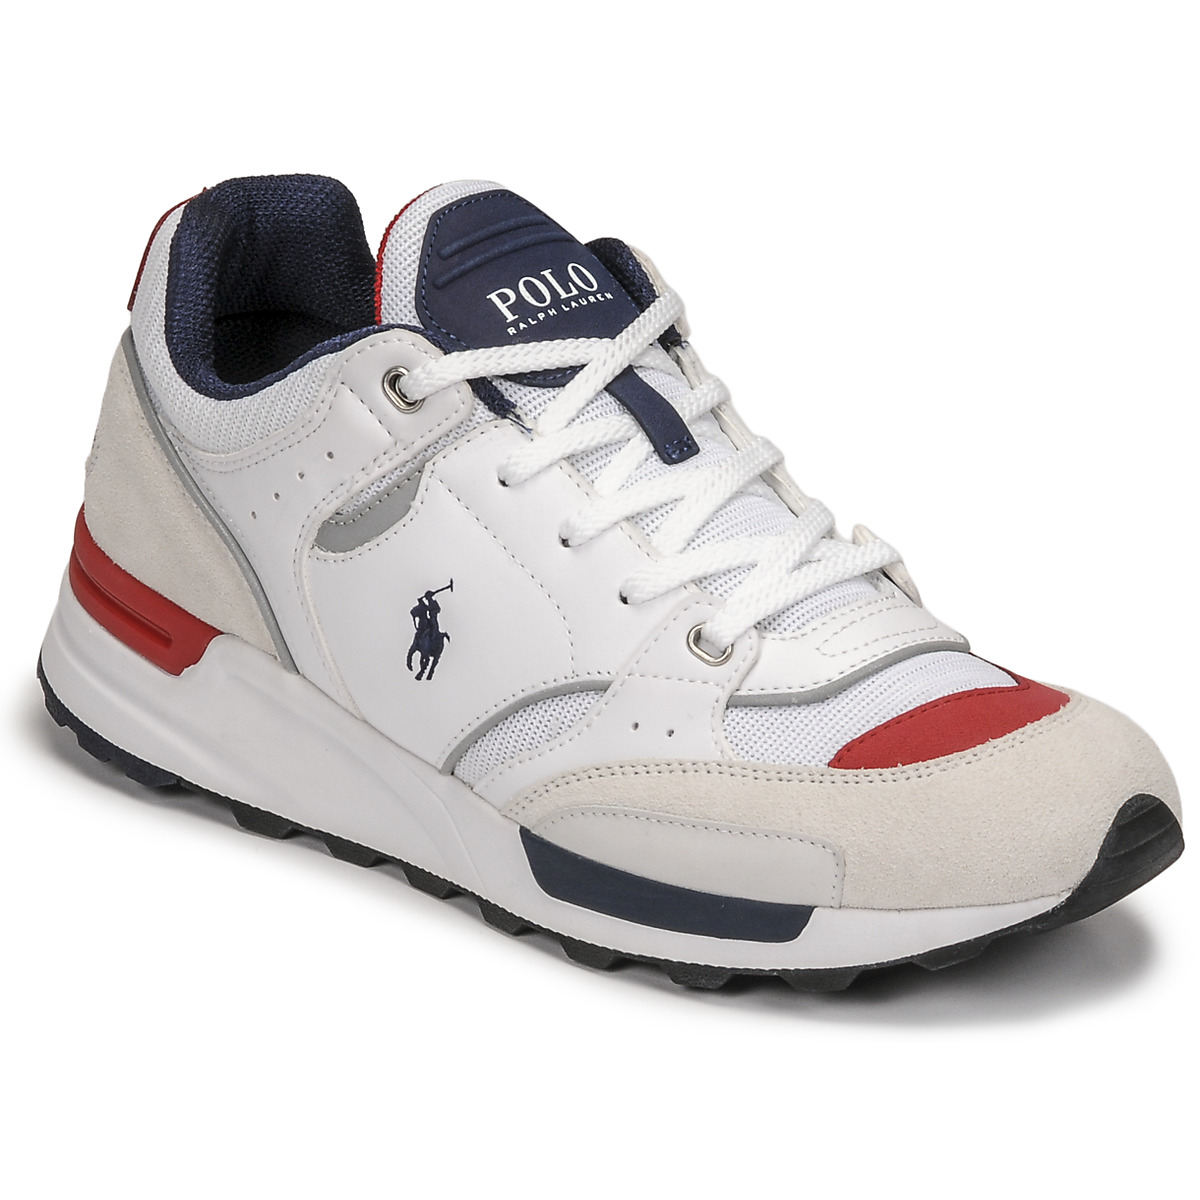 Polo Ralph Lauren TRACKSTER 200 White - Free delivery | Spartoo UK ! -  Shoes Low top trainers Men £ 